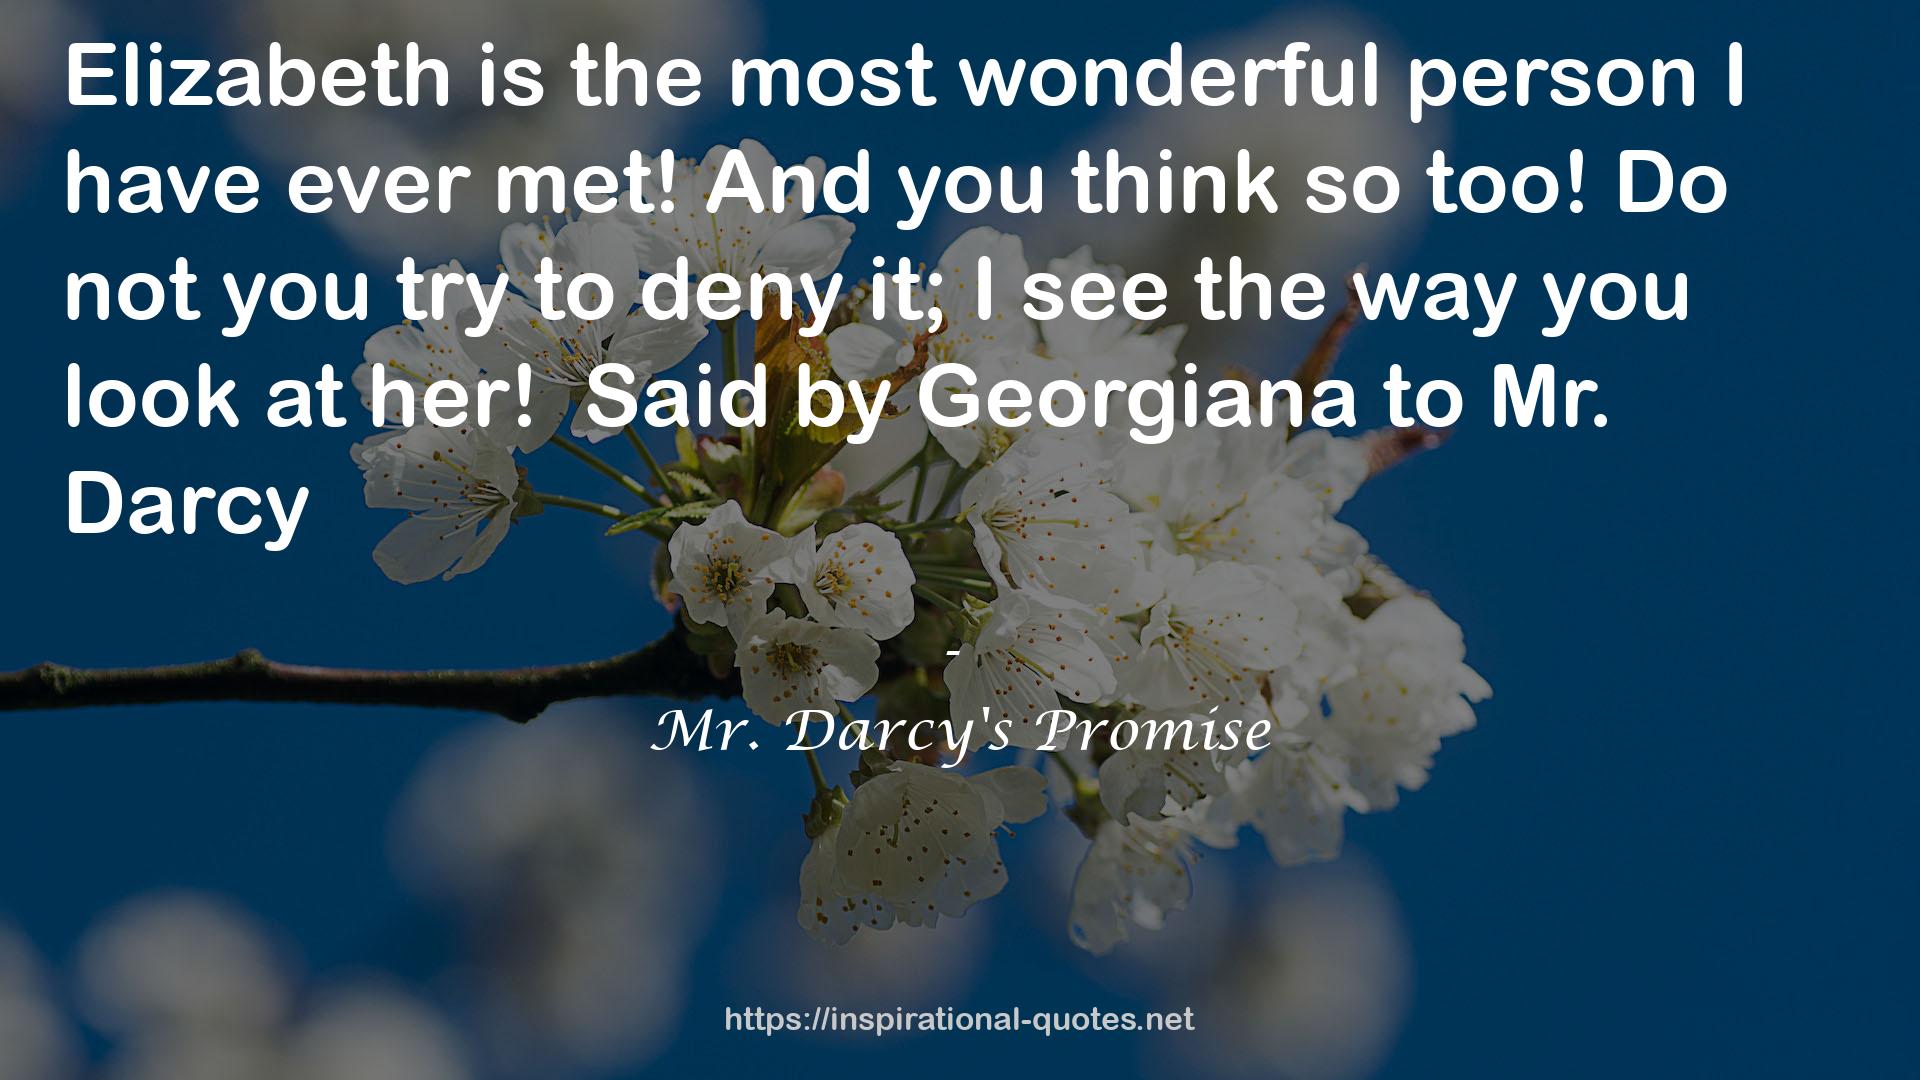 Mr. Darcy's Promise QUOTES